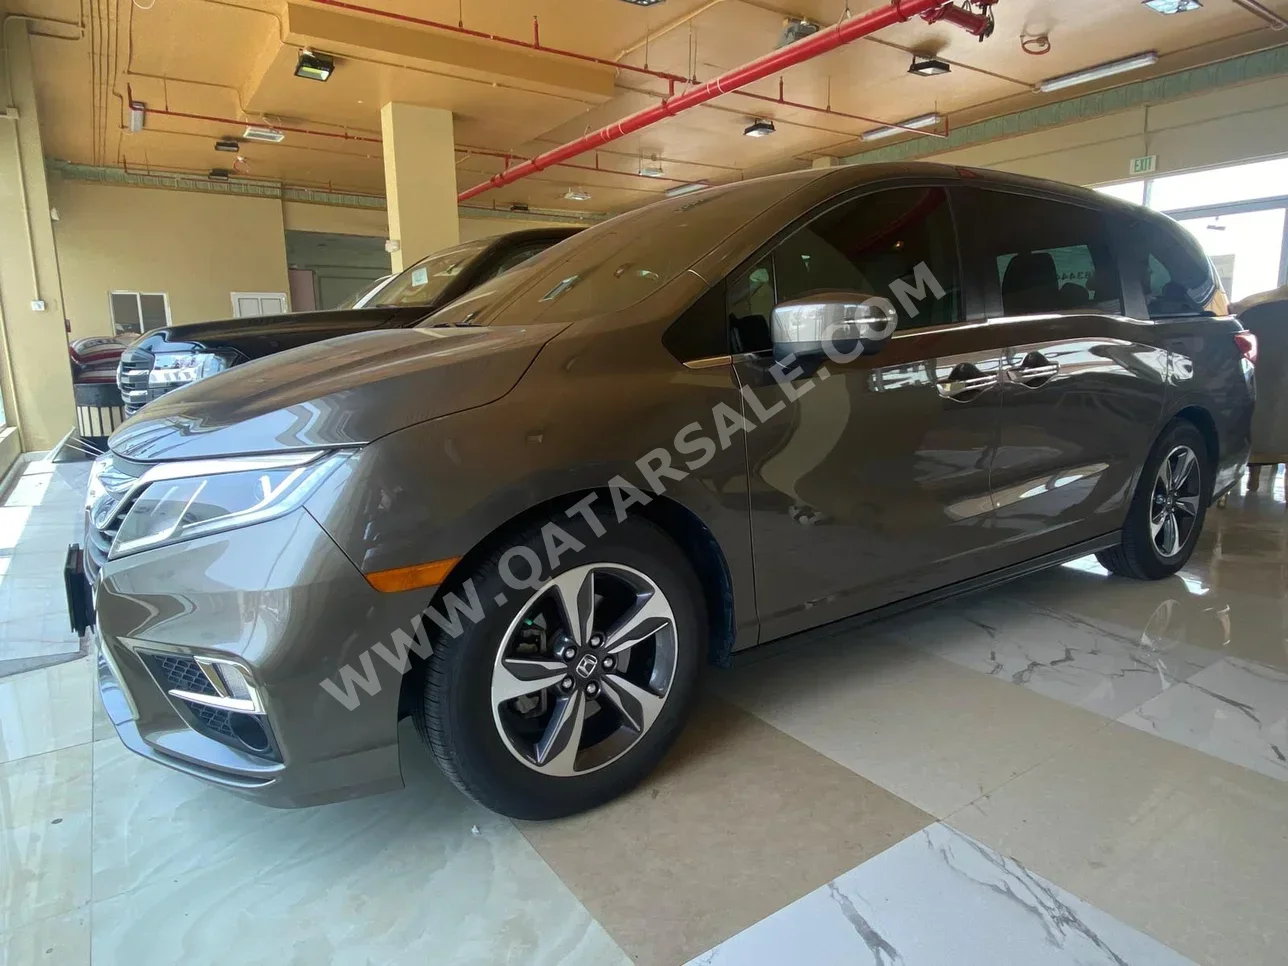  Honda  Odyssey  Touring  2020  Automatic  96,000 Km  6 Cylinder  Four Wheel Drive (4WD)  SUV  Brown  With Warranty